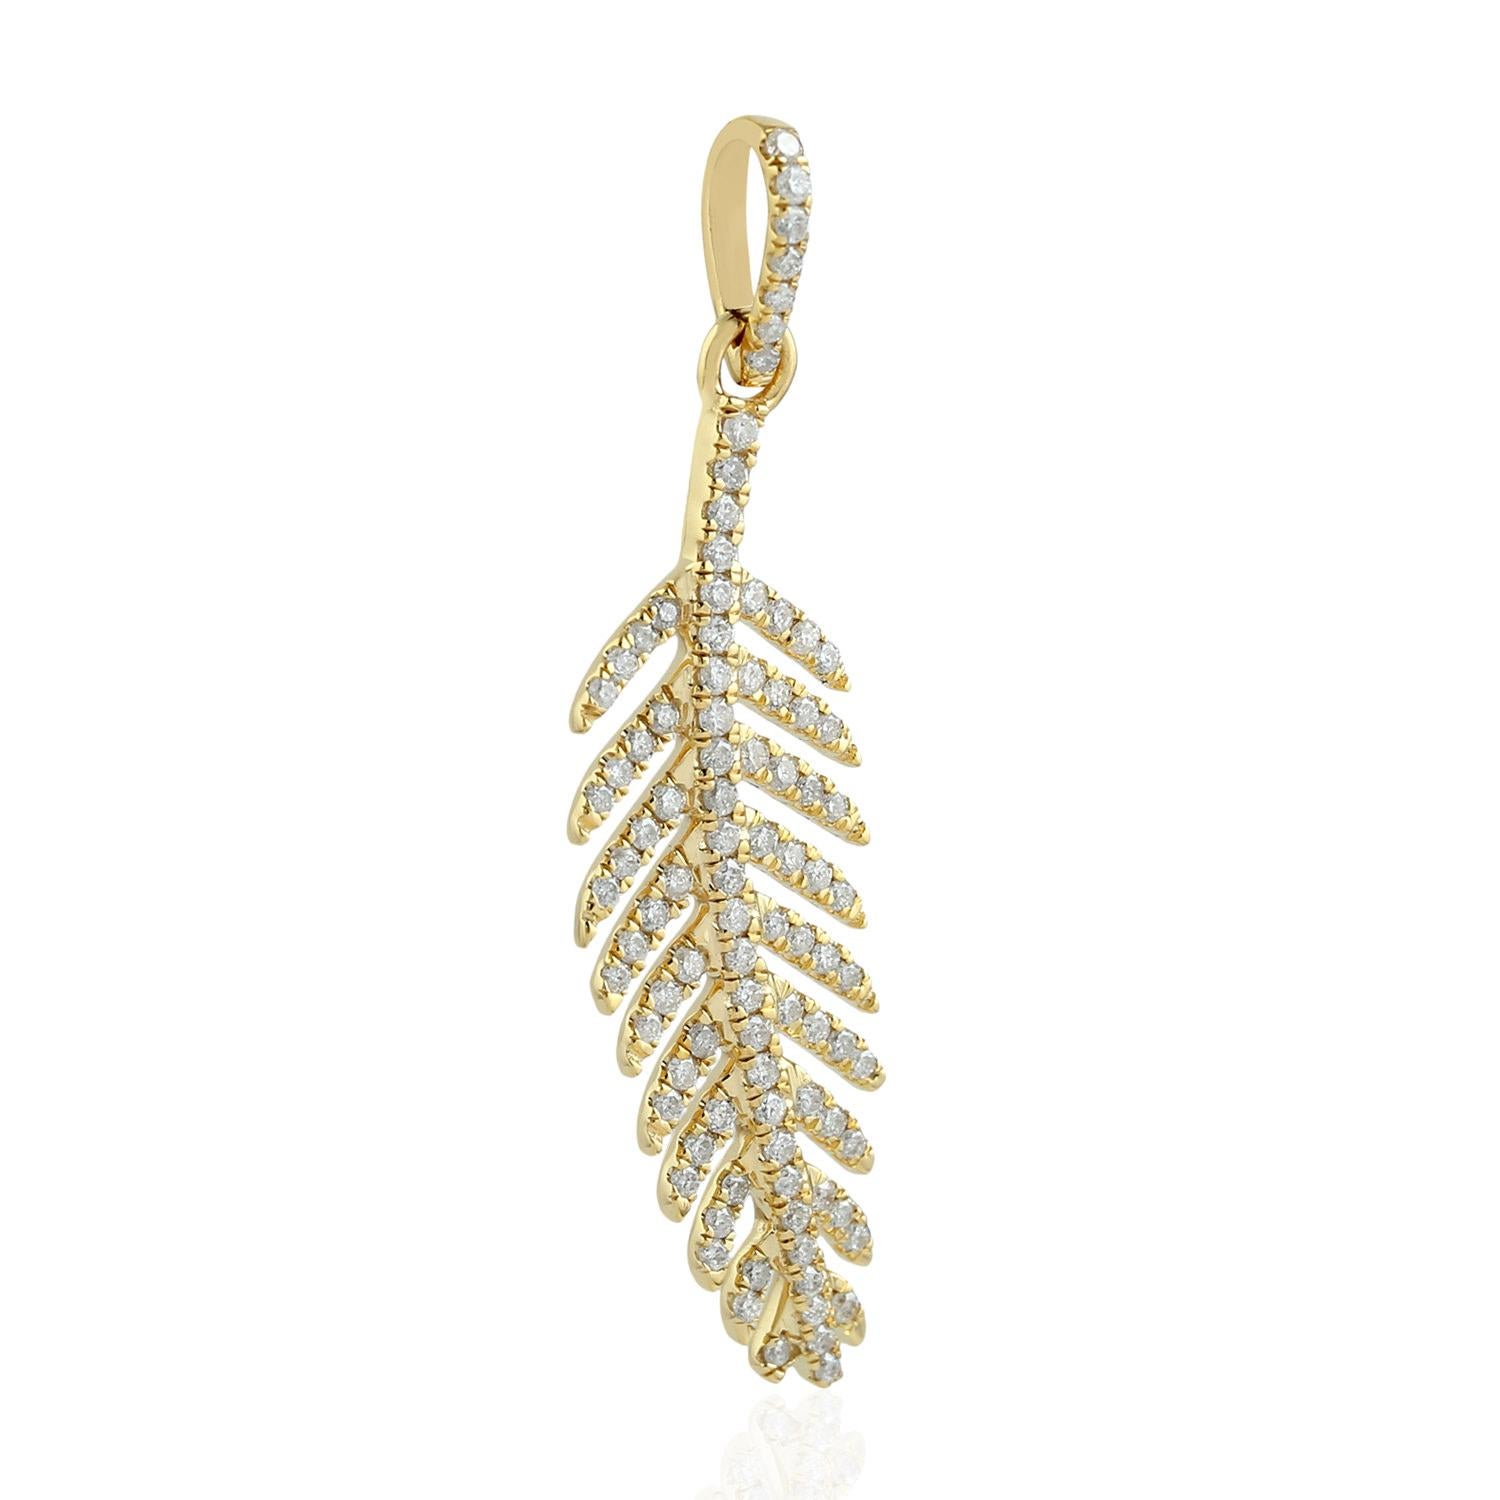 This 14 karat gold pendant is set with .47 carats of shimmering diamonds. 

Feathers are a symbol of freedom because they are associated with wings and birds.  Birds are free to fly and they represent freedom.  They fly and glide peacefully in the